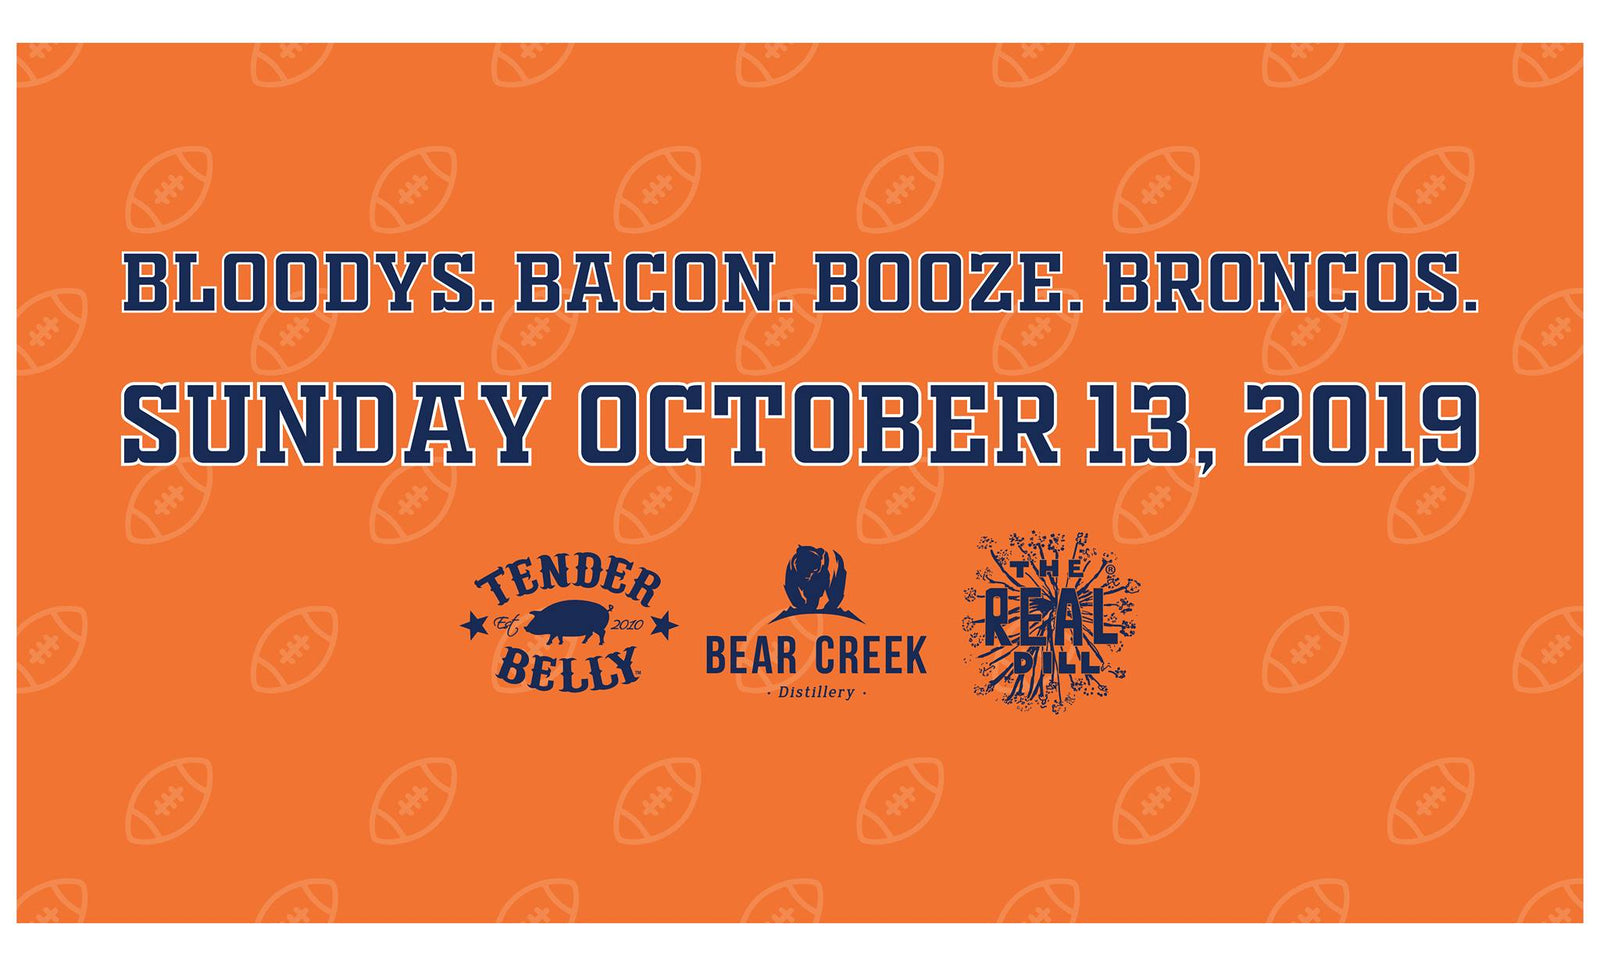 BLOODYS. BACON. BOOZE. BRONCOS. - Tender Belly